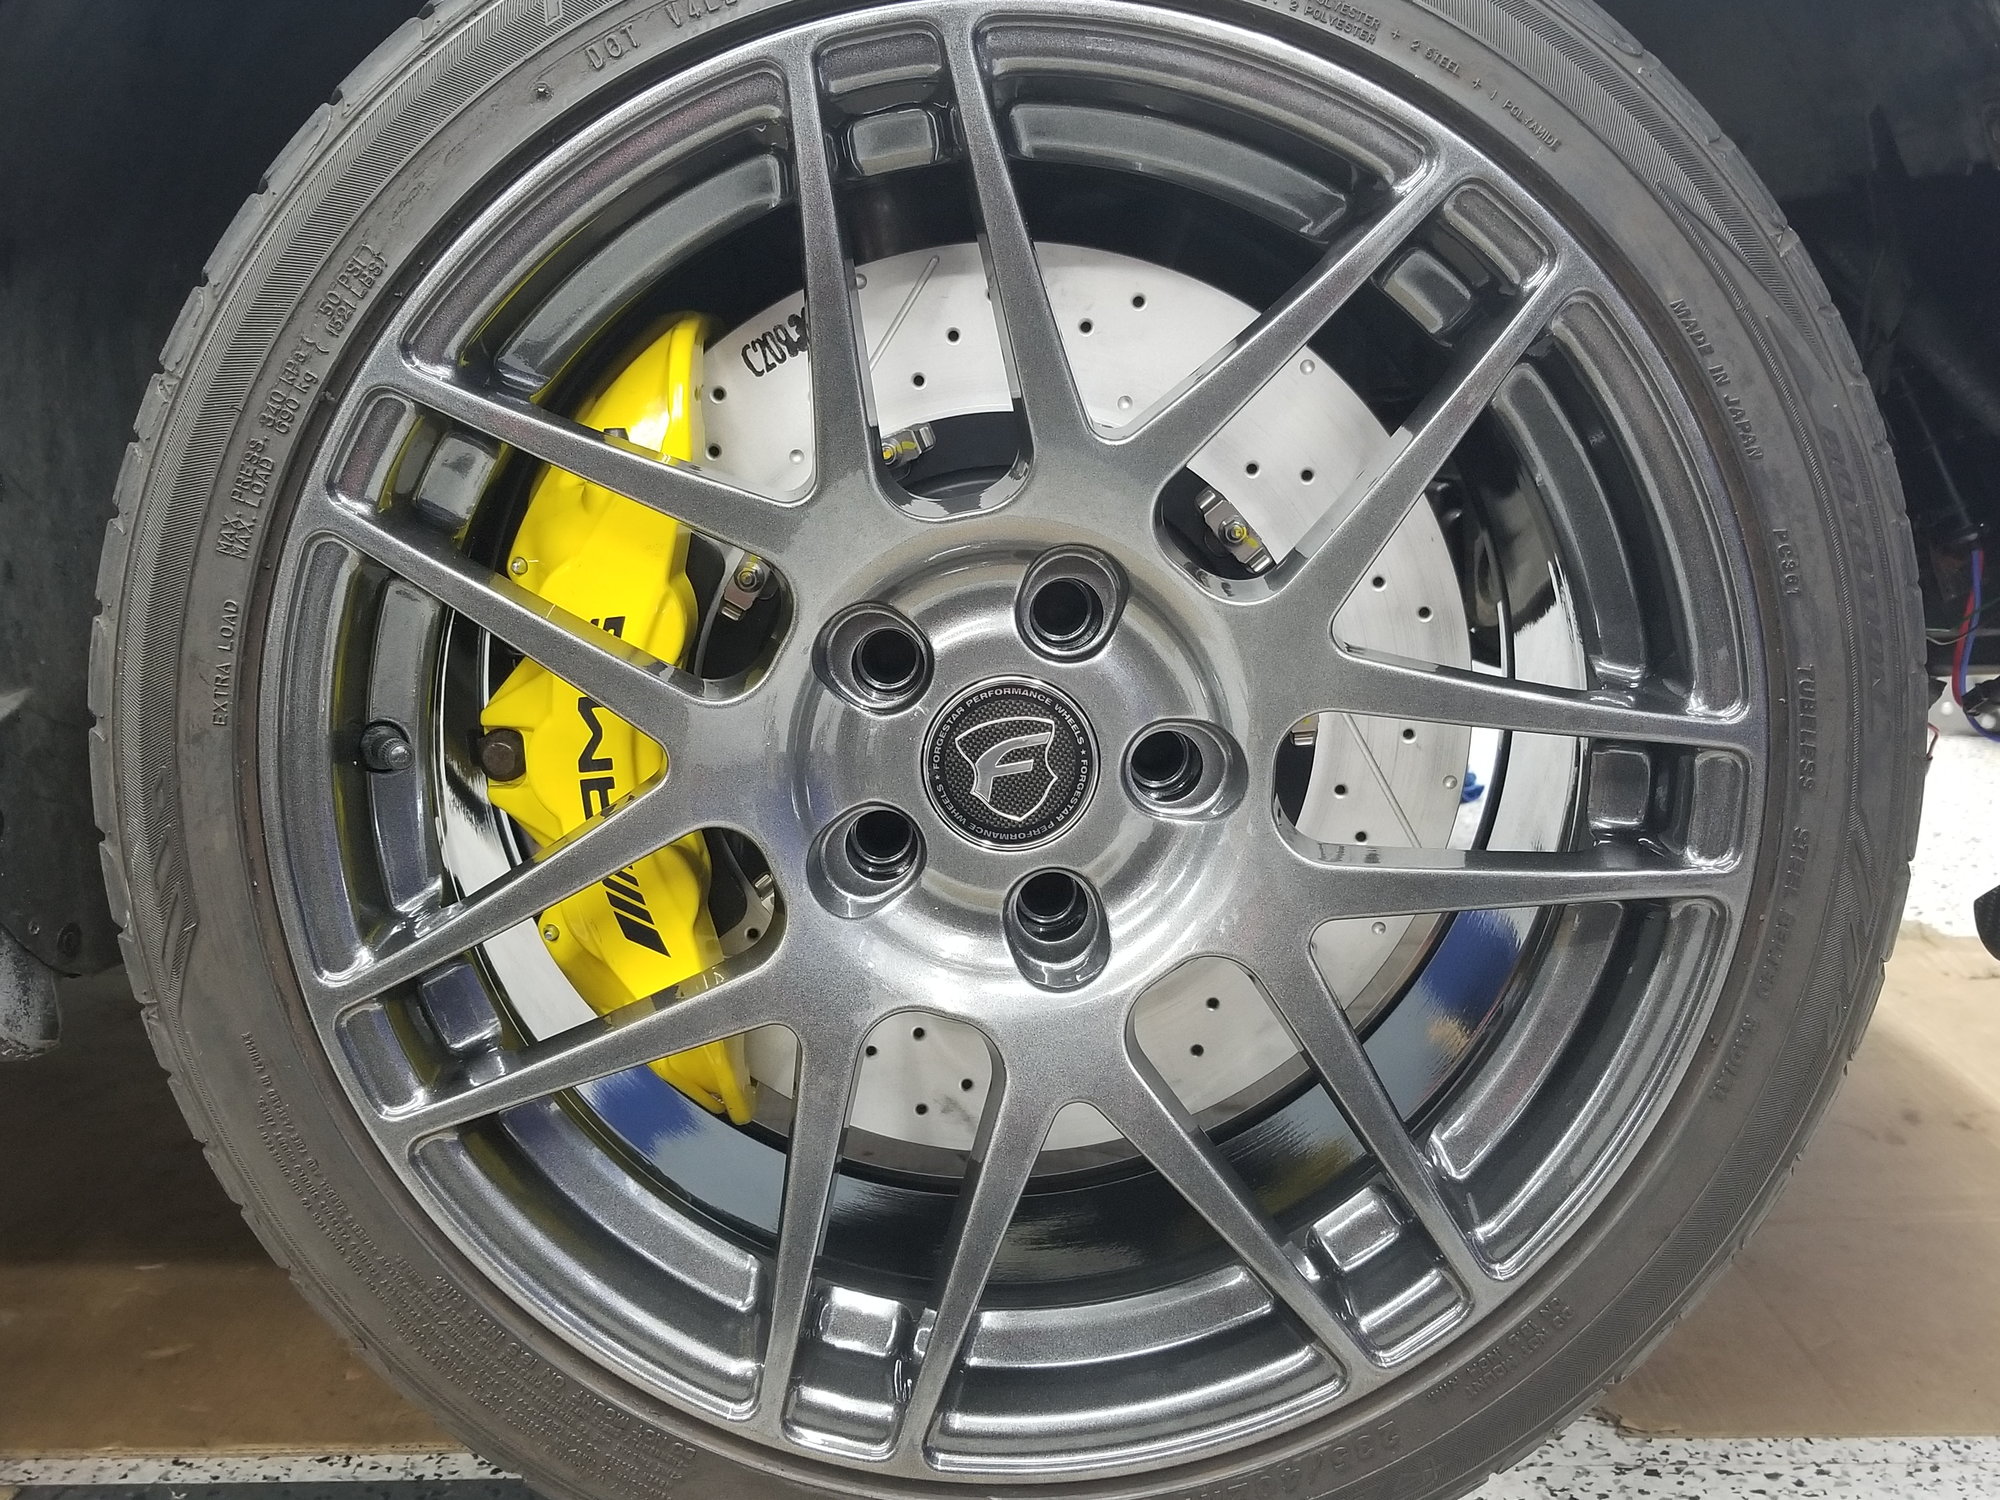 C55 brake upgrade to 6/4 pot AMG calipers - Page 2 - MBWorld.org Forums